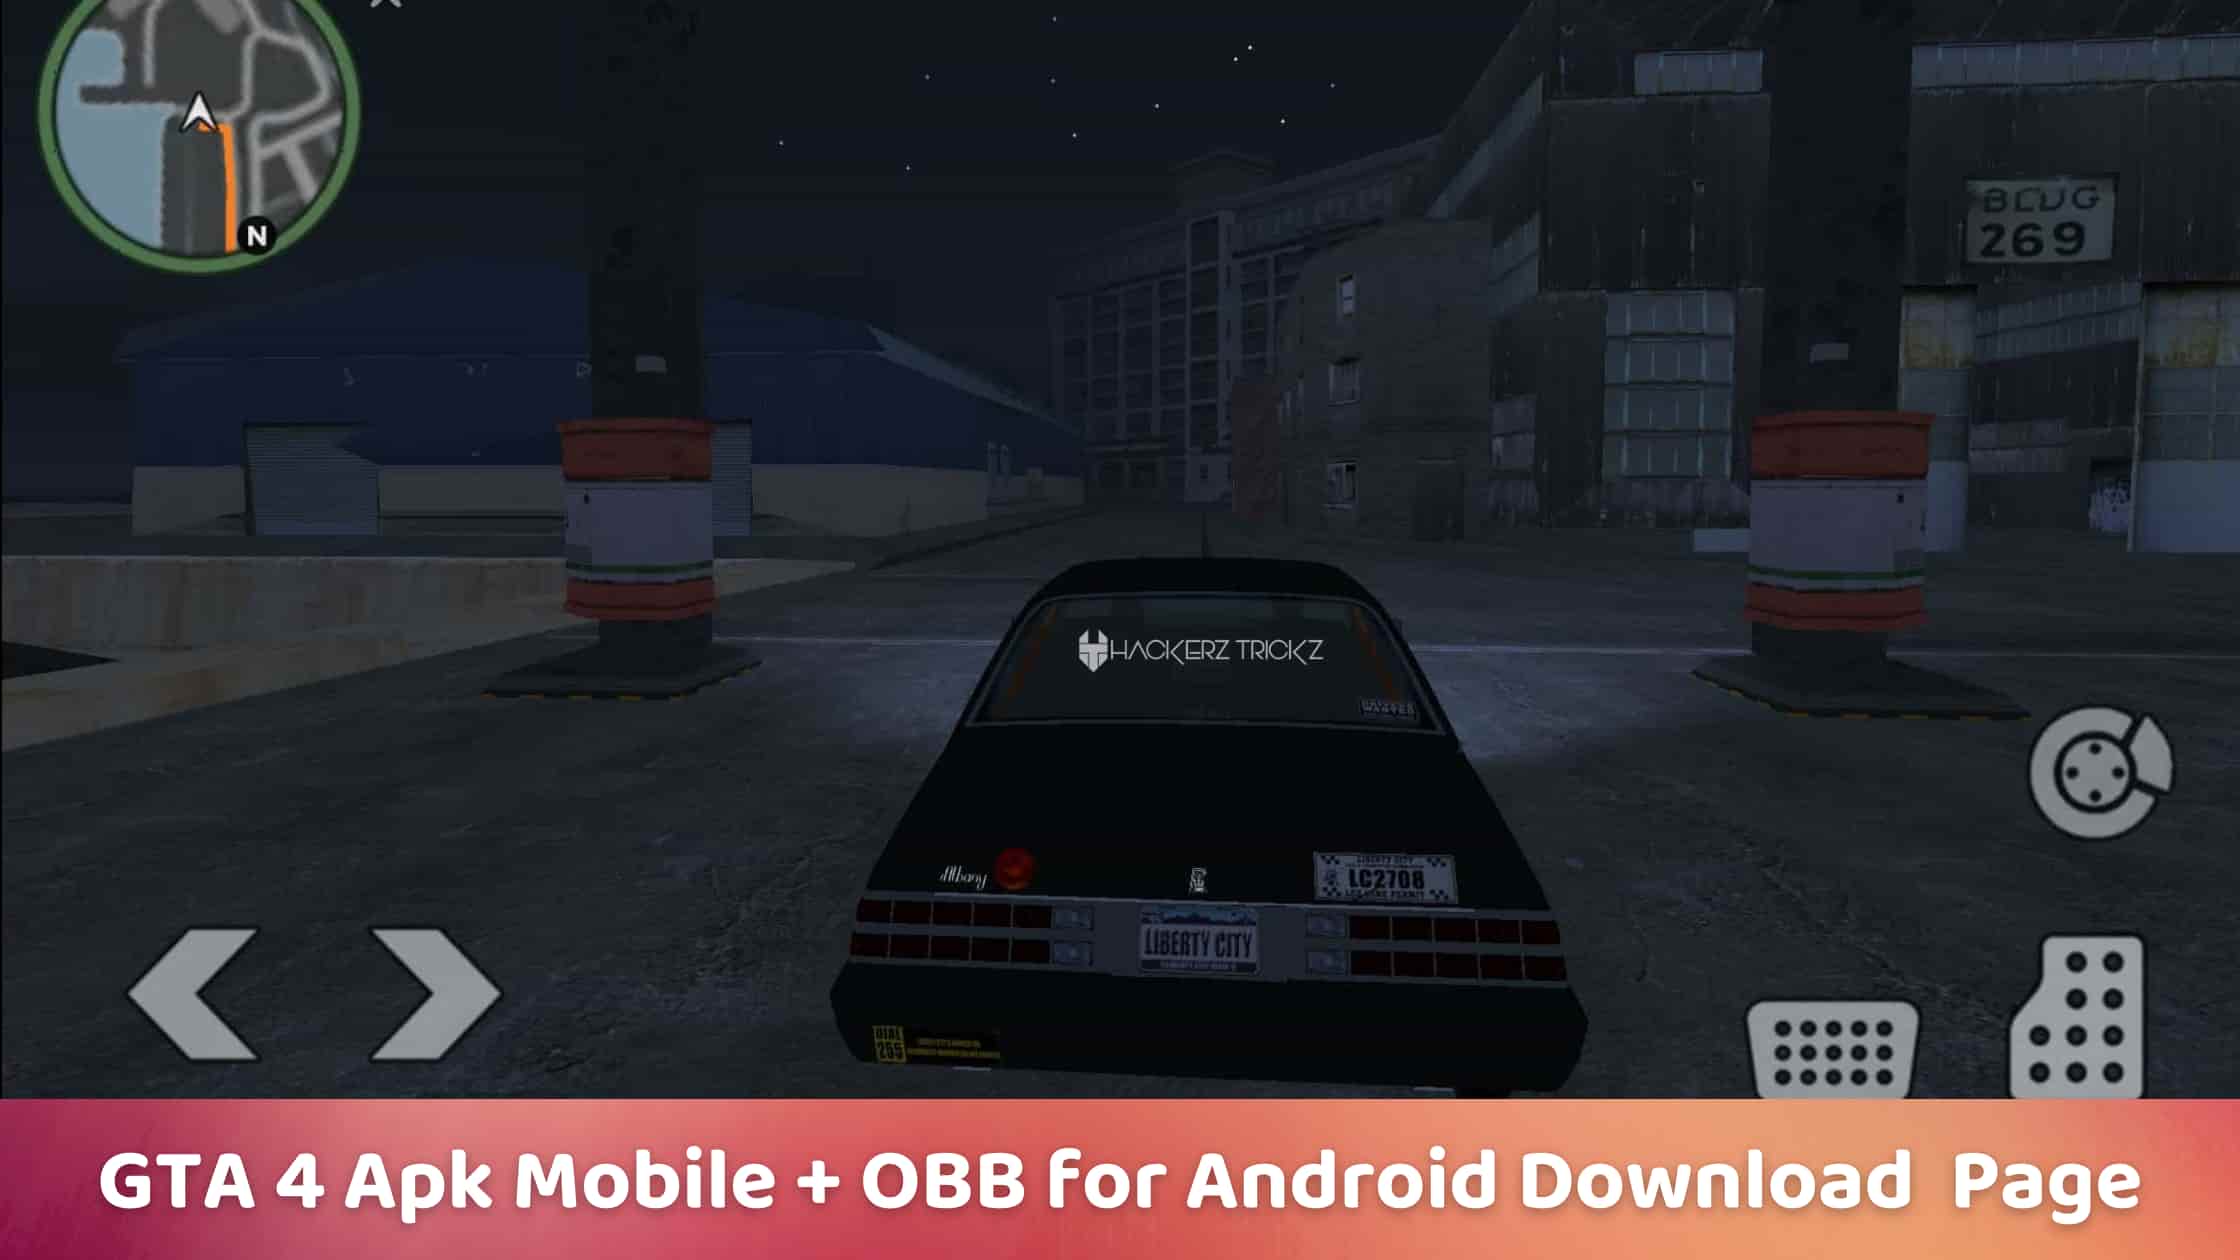 GTA 4 Apk Mobile + OBB for Android Download Page